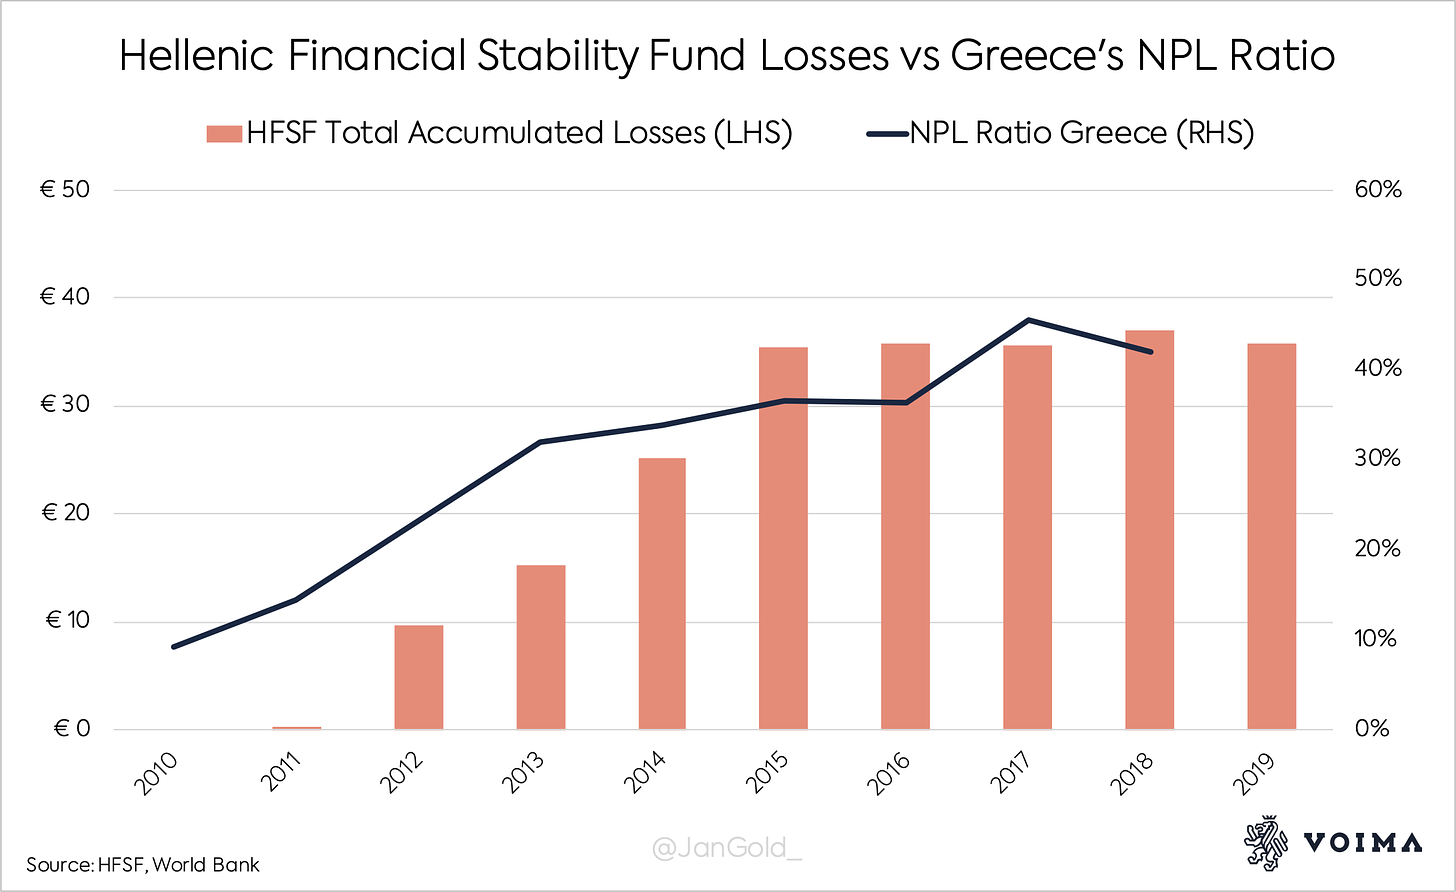 Hellenic Financial Stability Fund Losses vs Greeces NPL Ratio